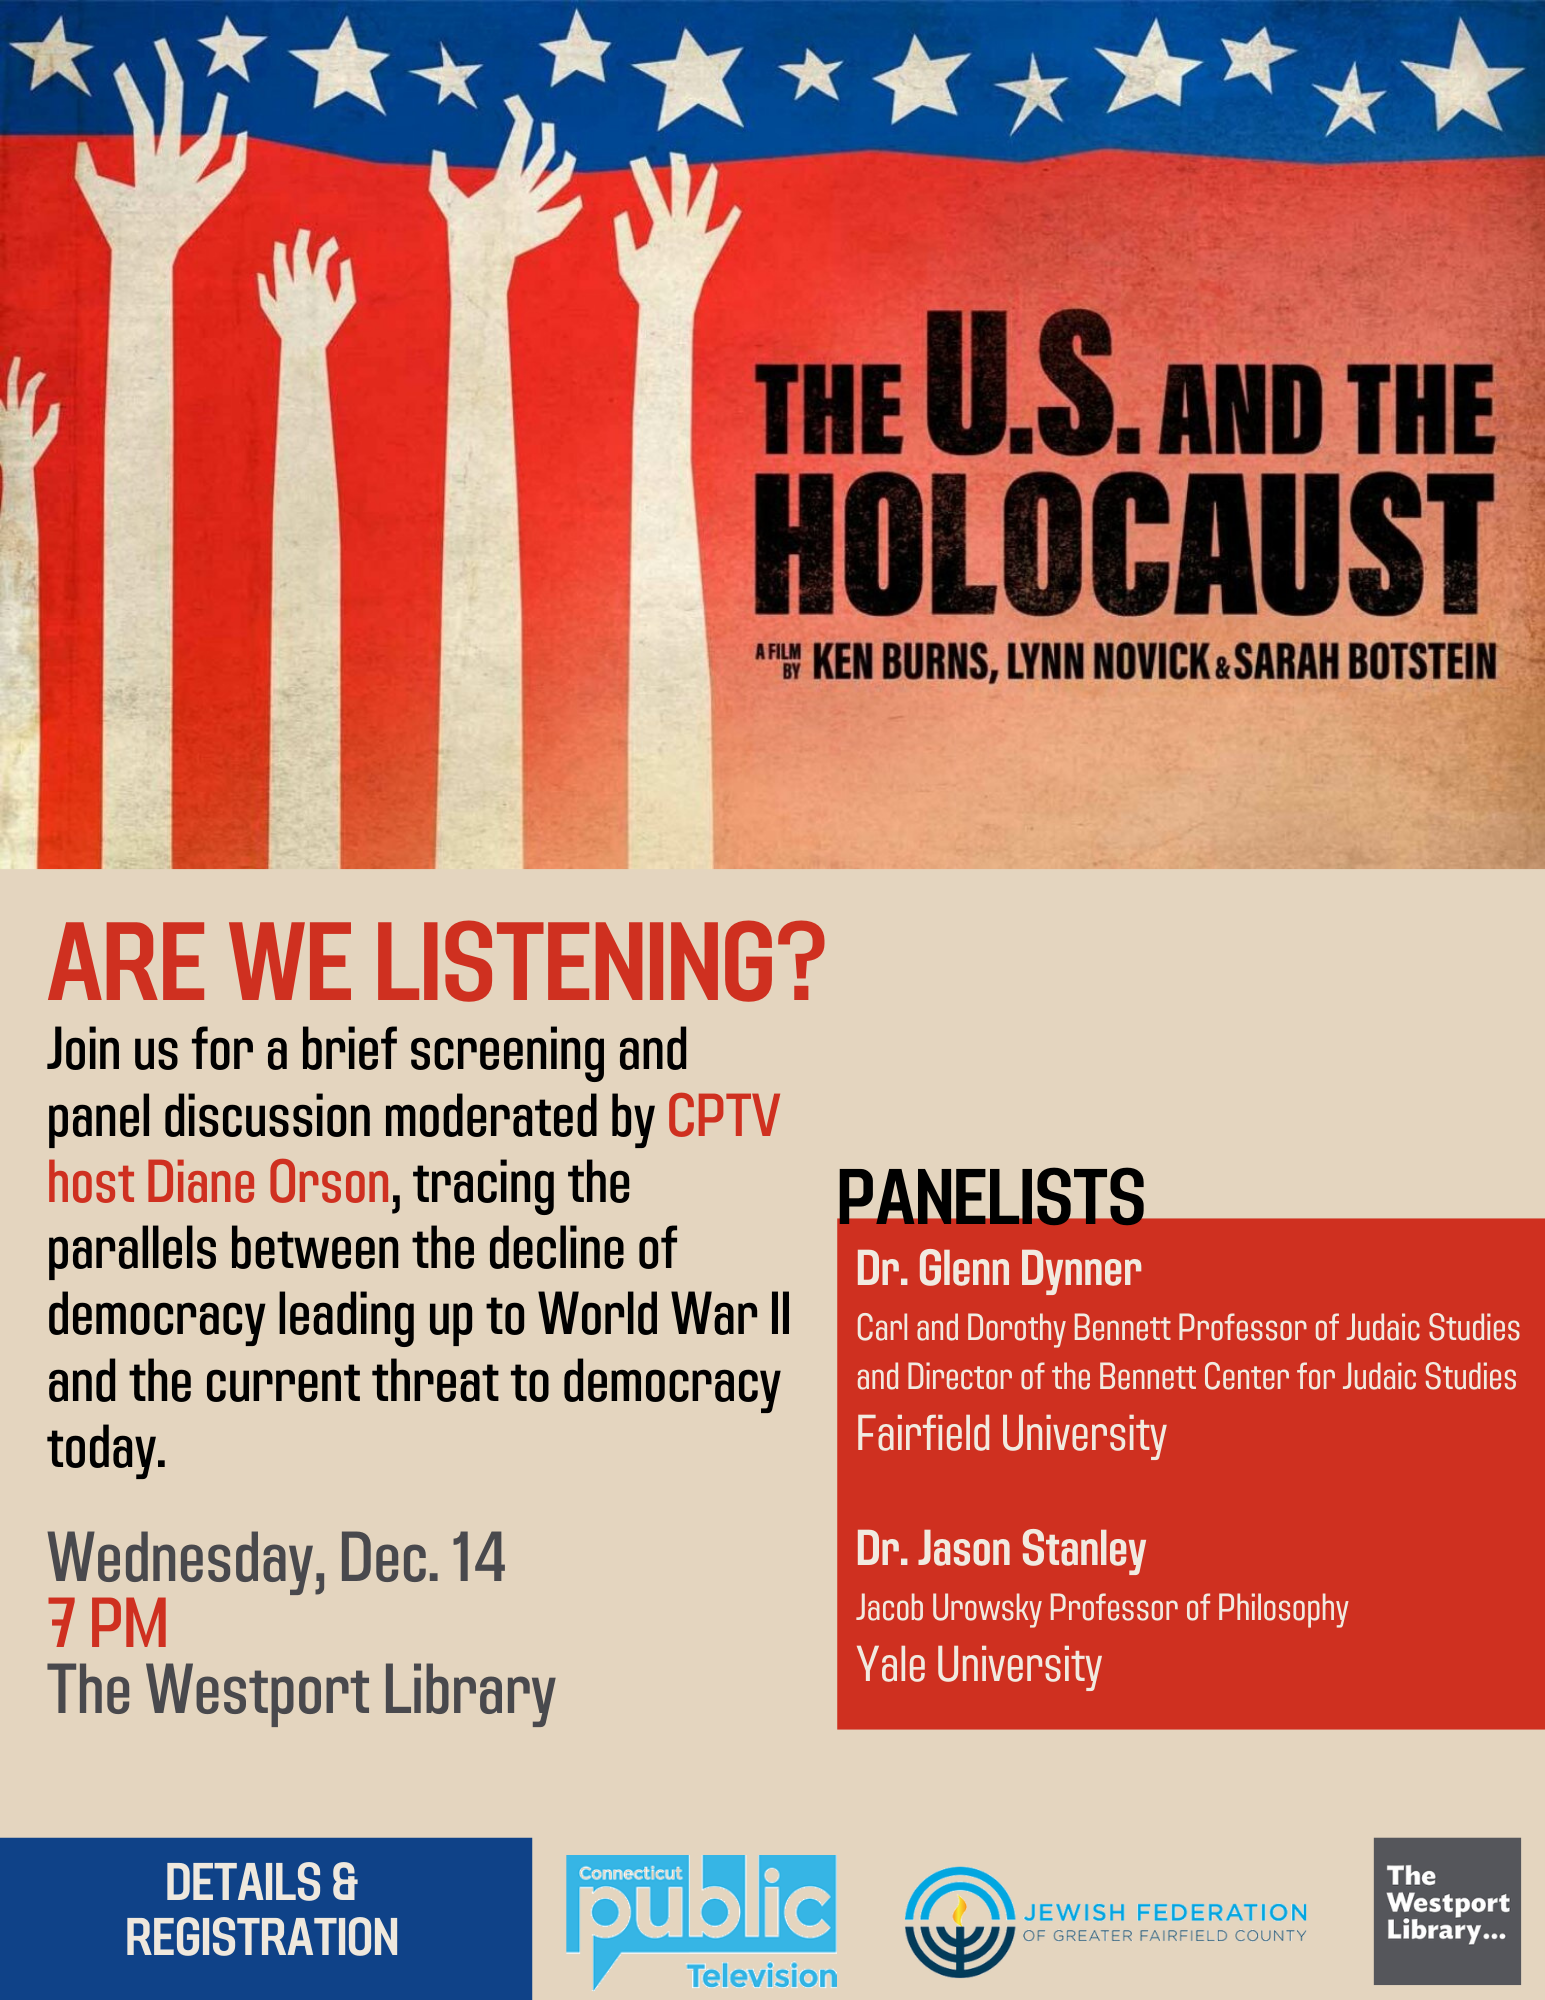 Logo for the film The US and the Holocaust with details about the December 14 event in Westport, CT